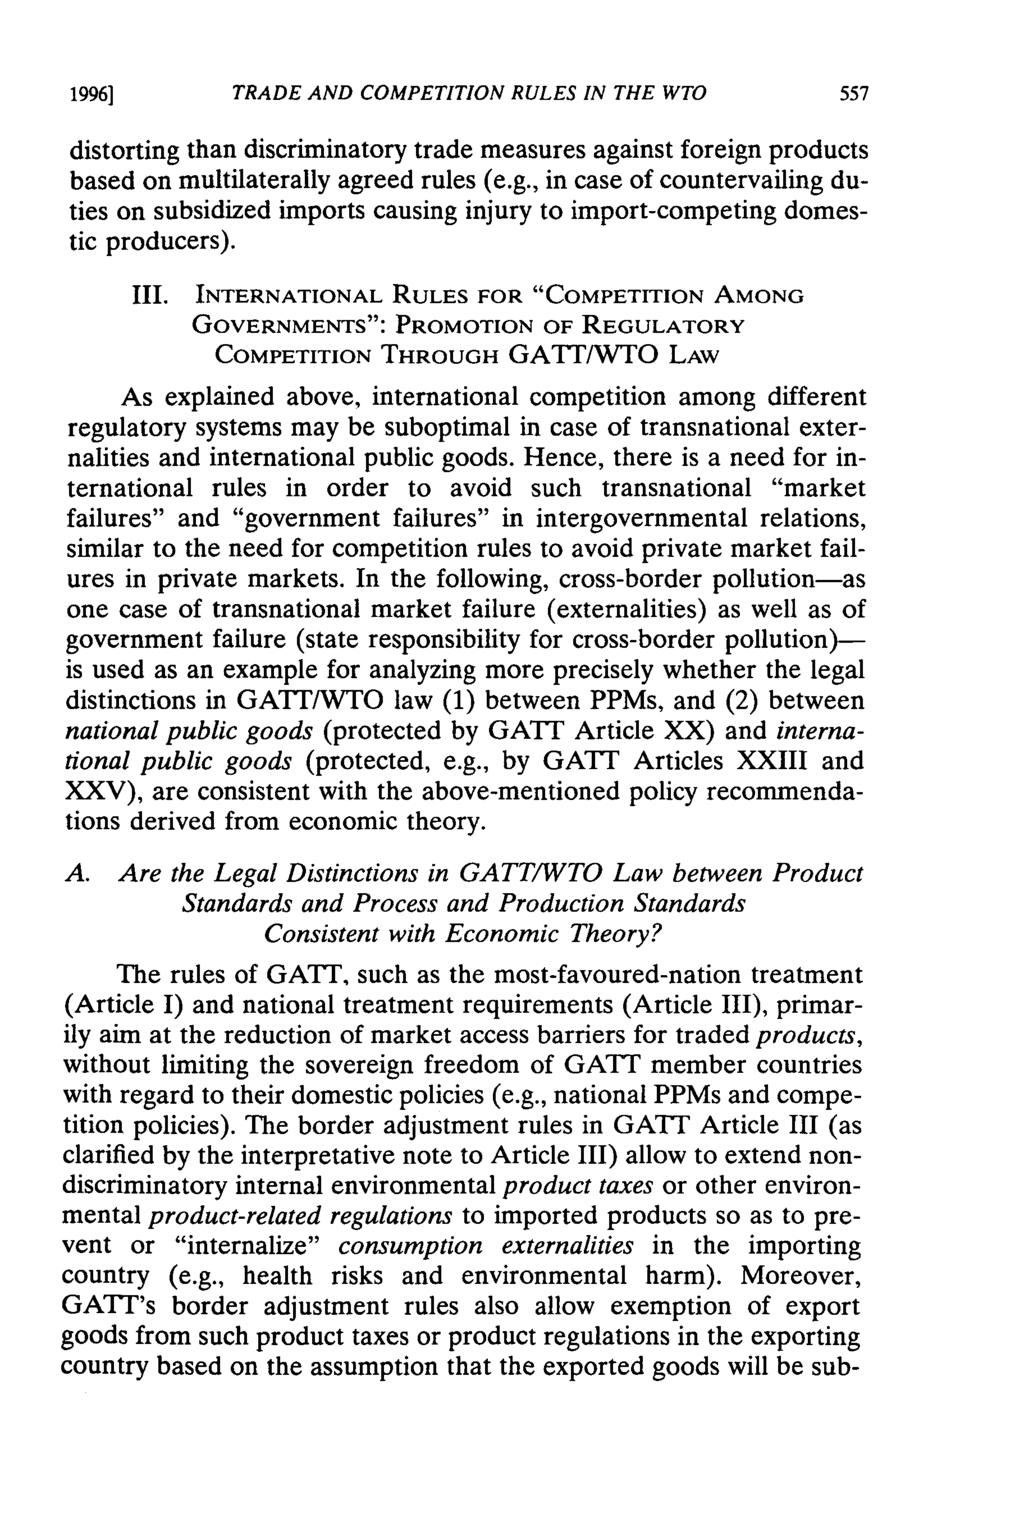 1996] TRADE AND COMPETITION RULES IN THE WTO distorting than discriminatory trade measures against foreign products based on multilaterally agreed rules (e.g., in case of countervailing duties on subsidized imports causing injury to import-competing domestic producers).